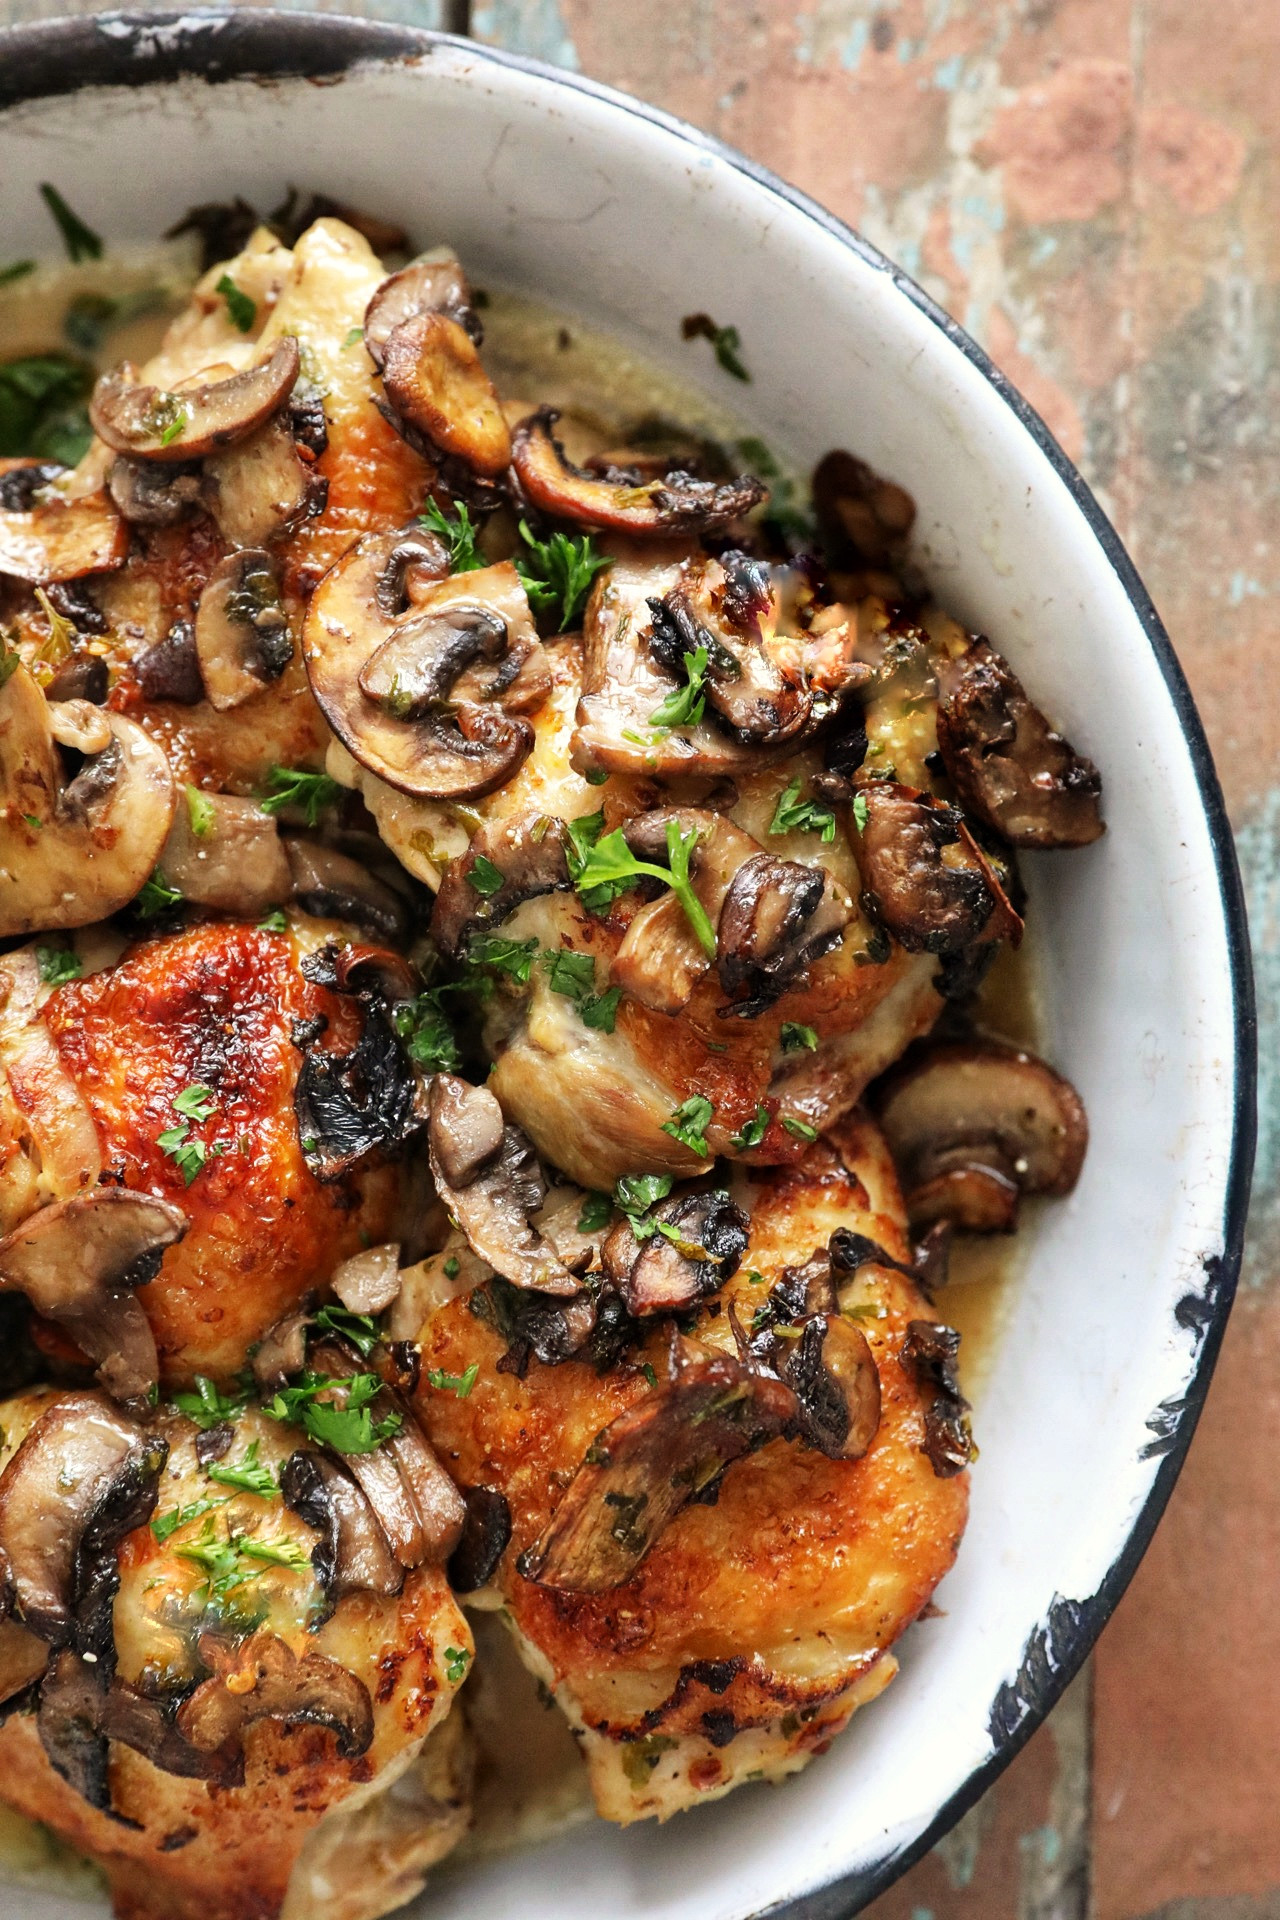 Baked Chicken with Mushrooms Unique Oven Roasted Chicken with Mushrooms and White Wine